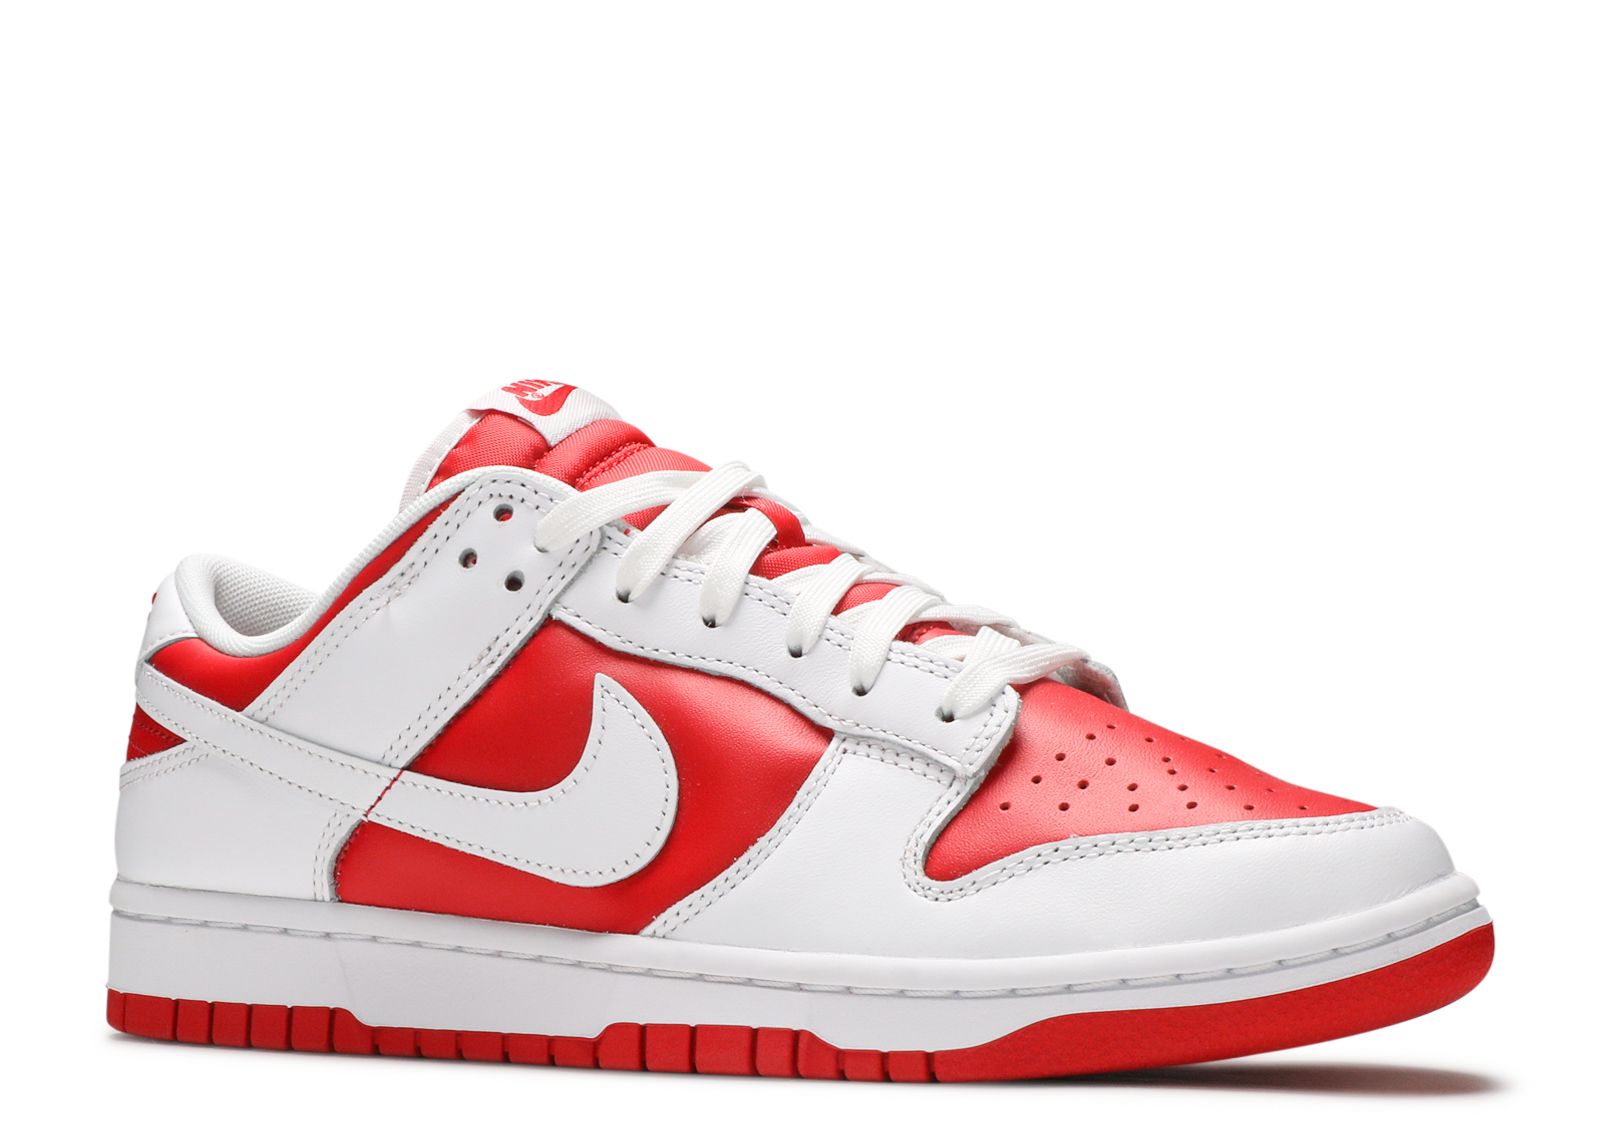 Dunk Low 'Championship Red' - Nike - DD1391 600 - university red 